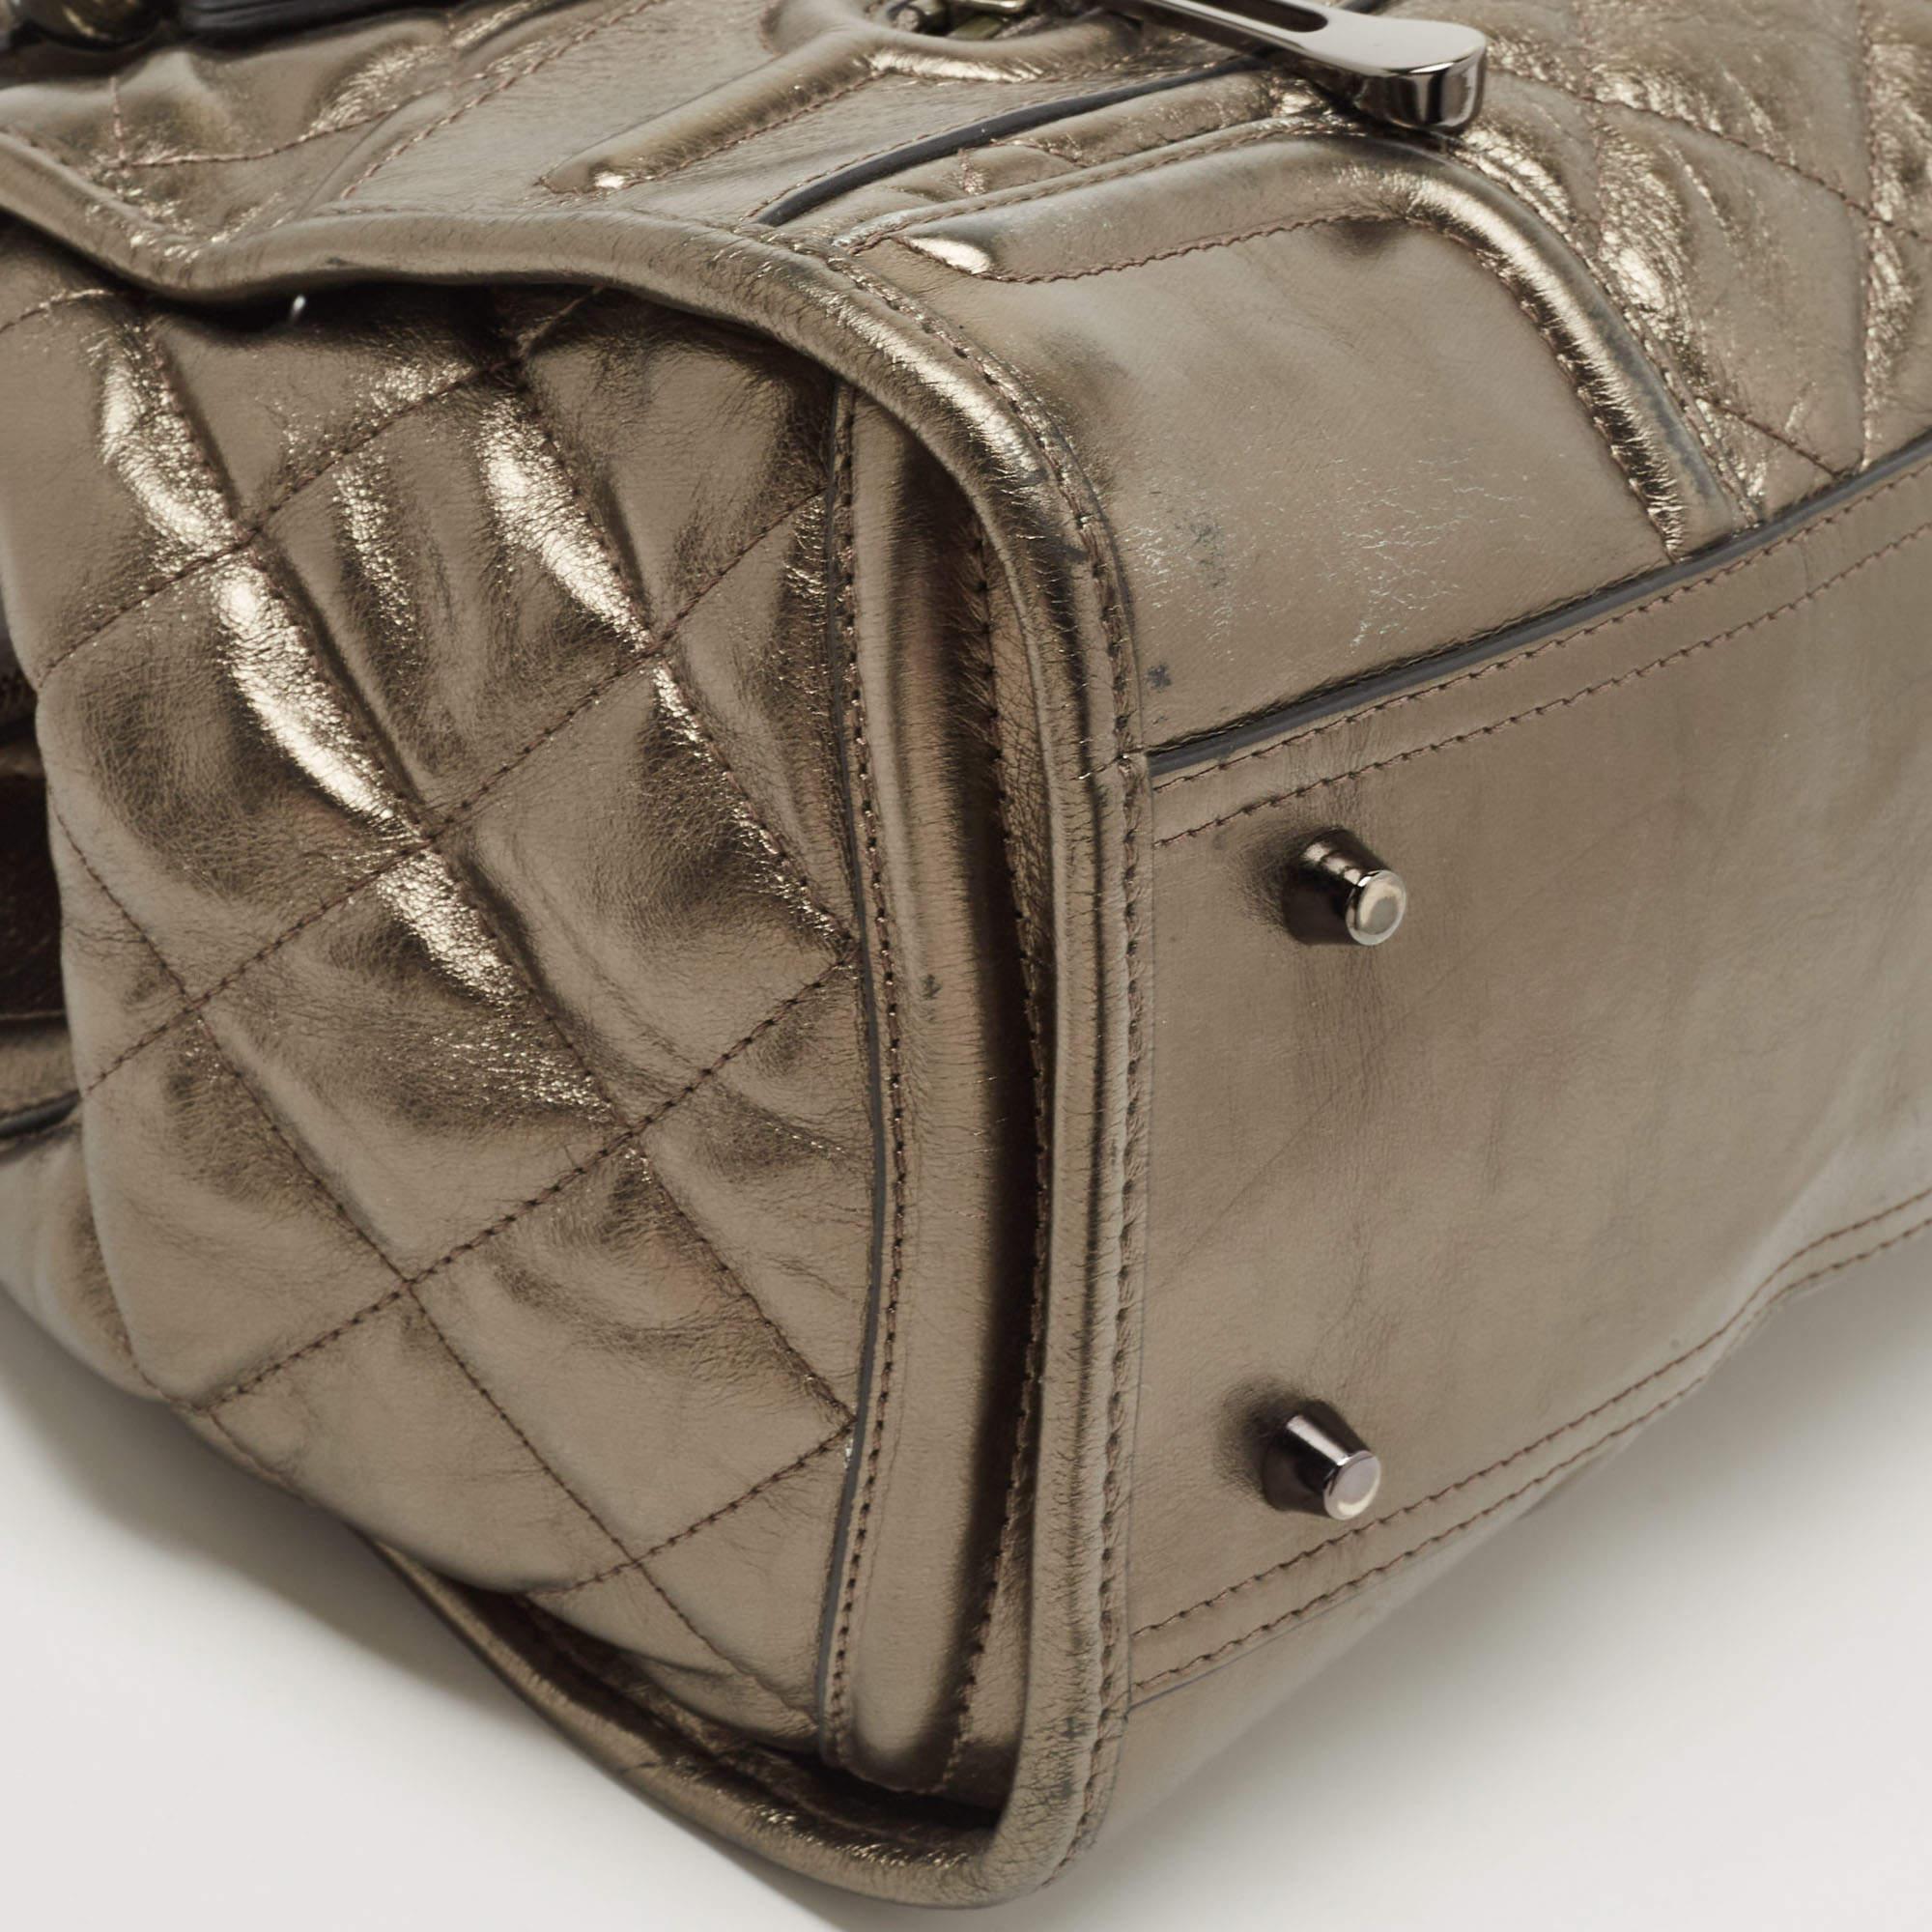 Burberry Metallic Quilted Leather Manor Satchel For Sale 3